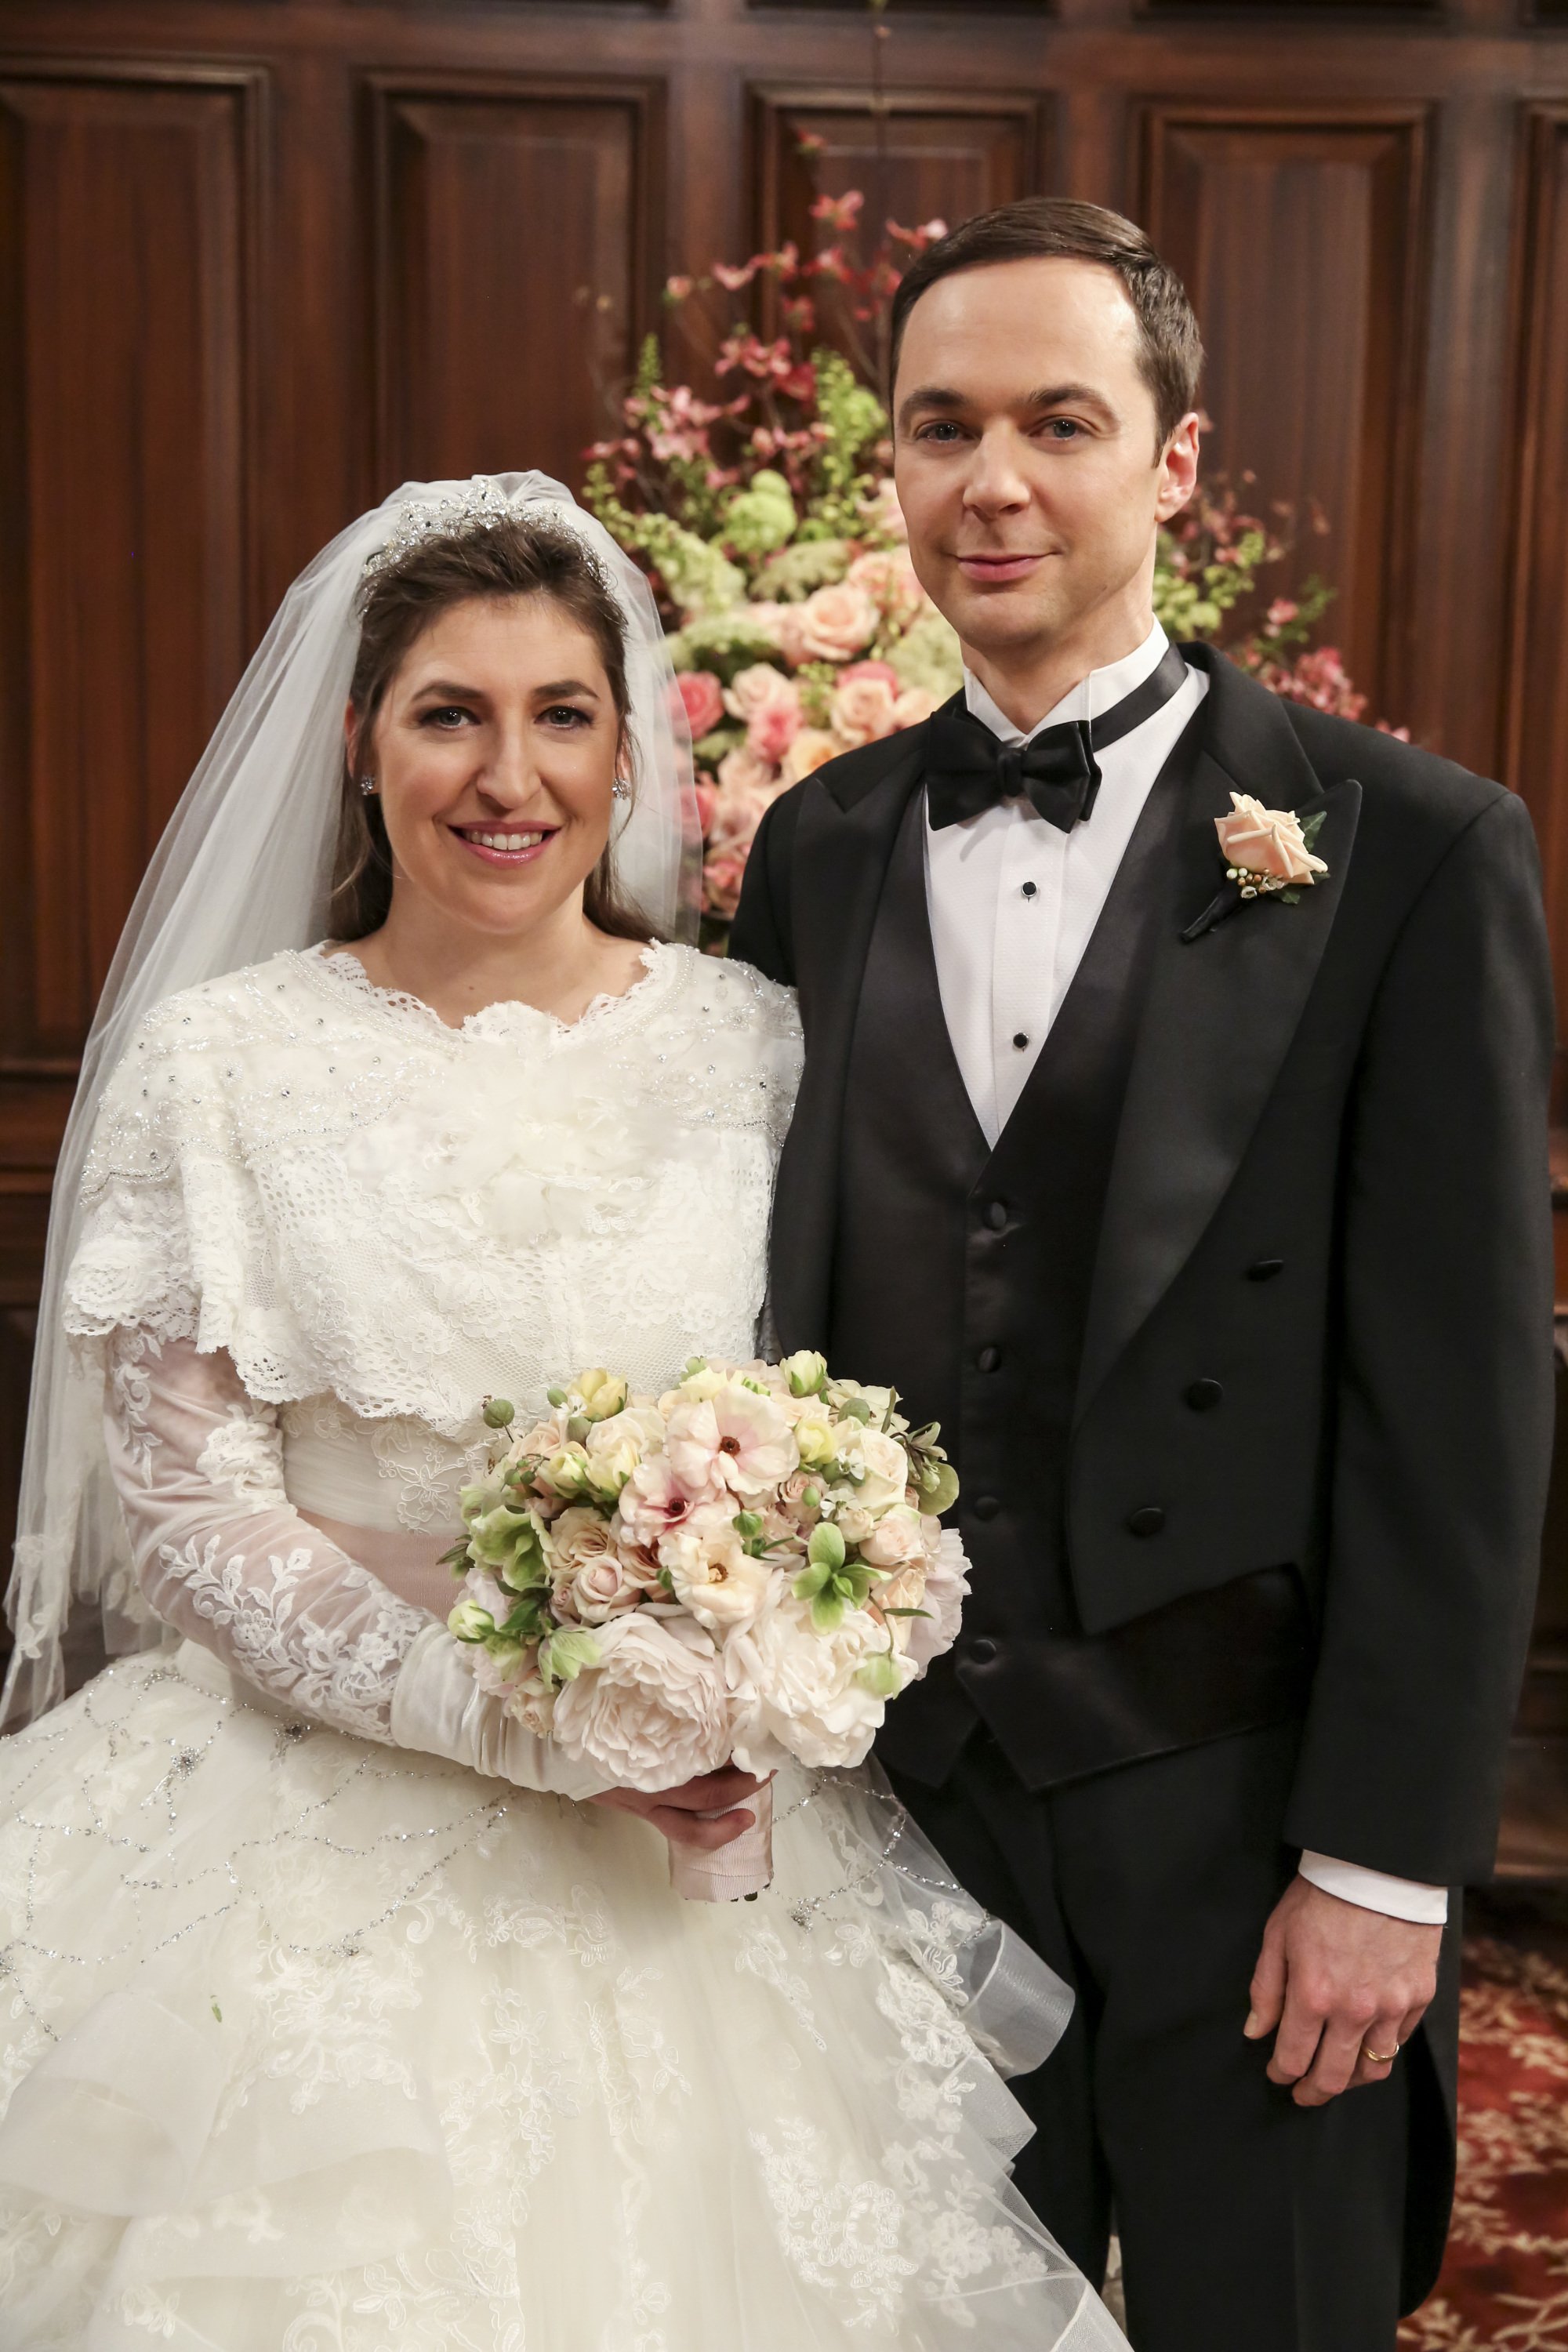  Amy Farrah Fowler (Mayim Bialik) and Sheldon Cooper (Jim Parsons) on the final episode of "The Big Bang Theory" | Source: Getty Images